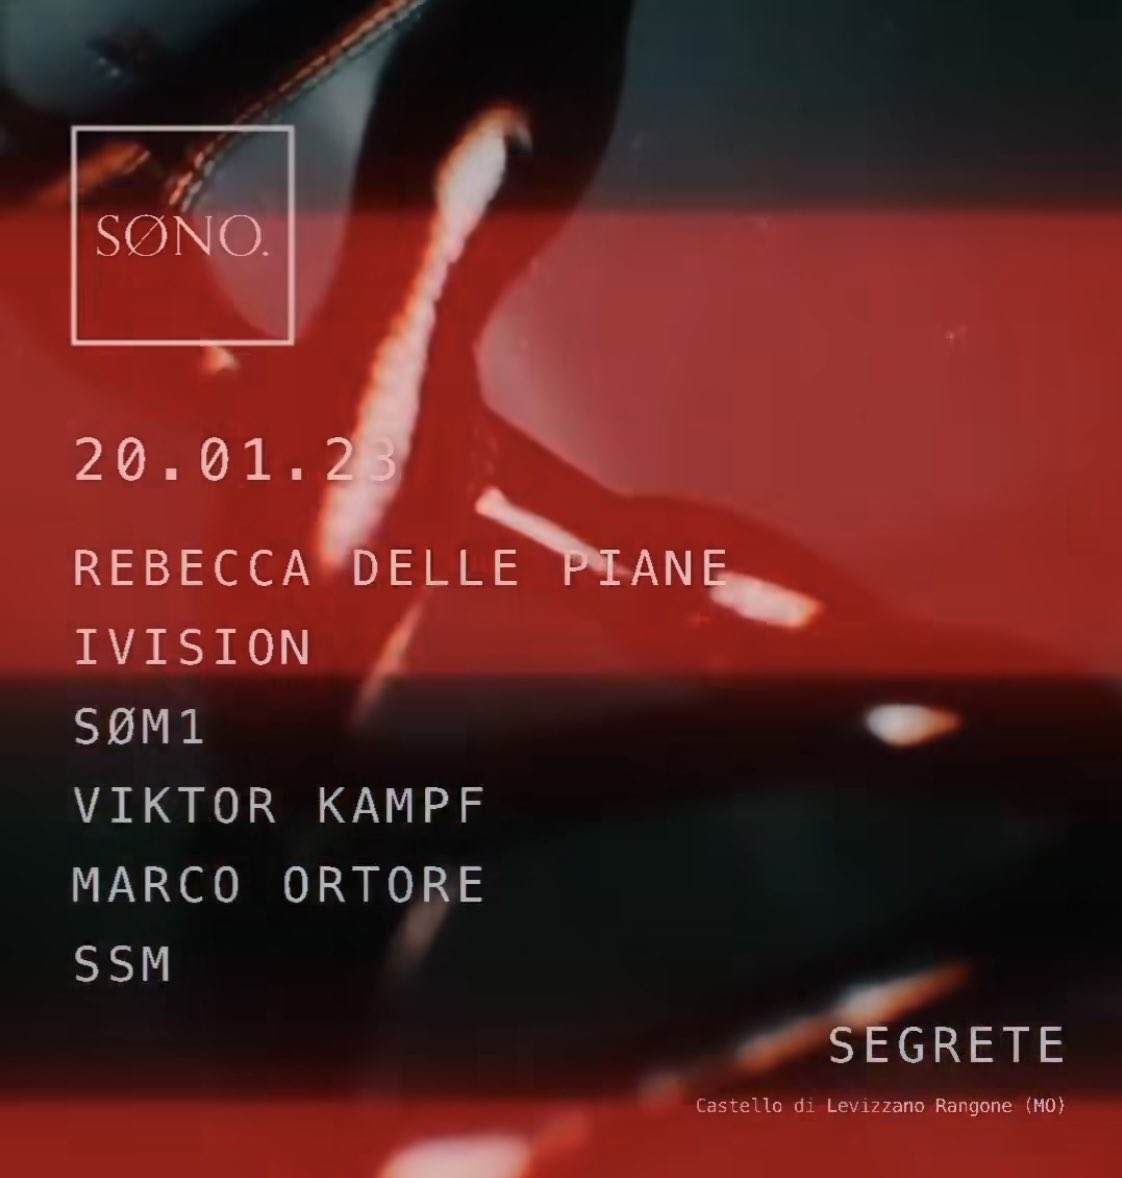 TONIGHT! #techno castle in the middle of #EmiliaRomagna 🏰
Ready for a crazy night w young italian talent #rebeccadellepiane 🥷

#music #event #weekend #mood